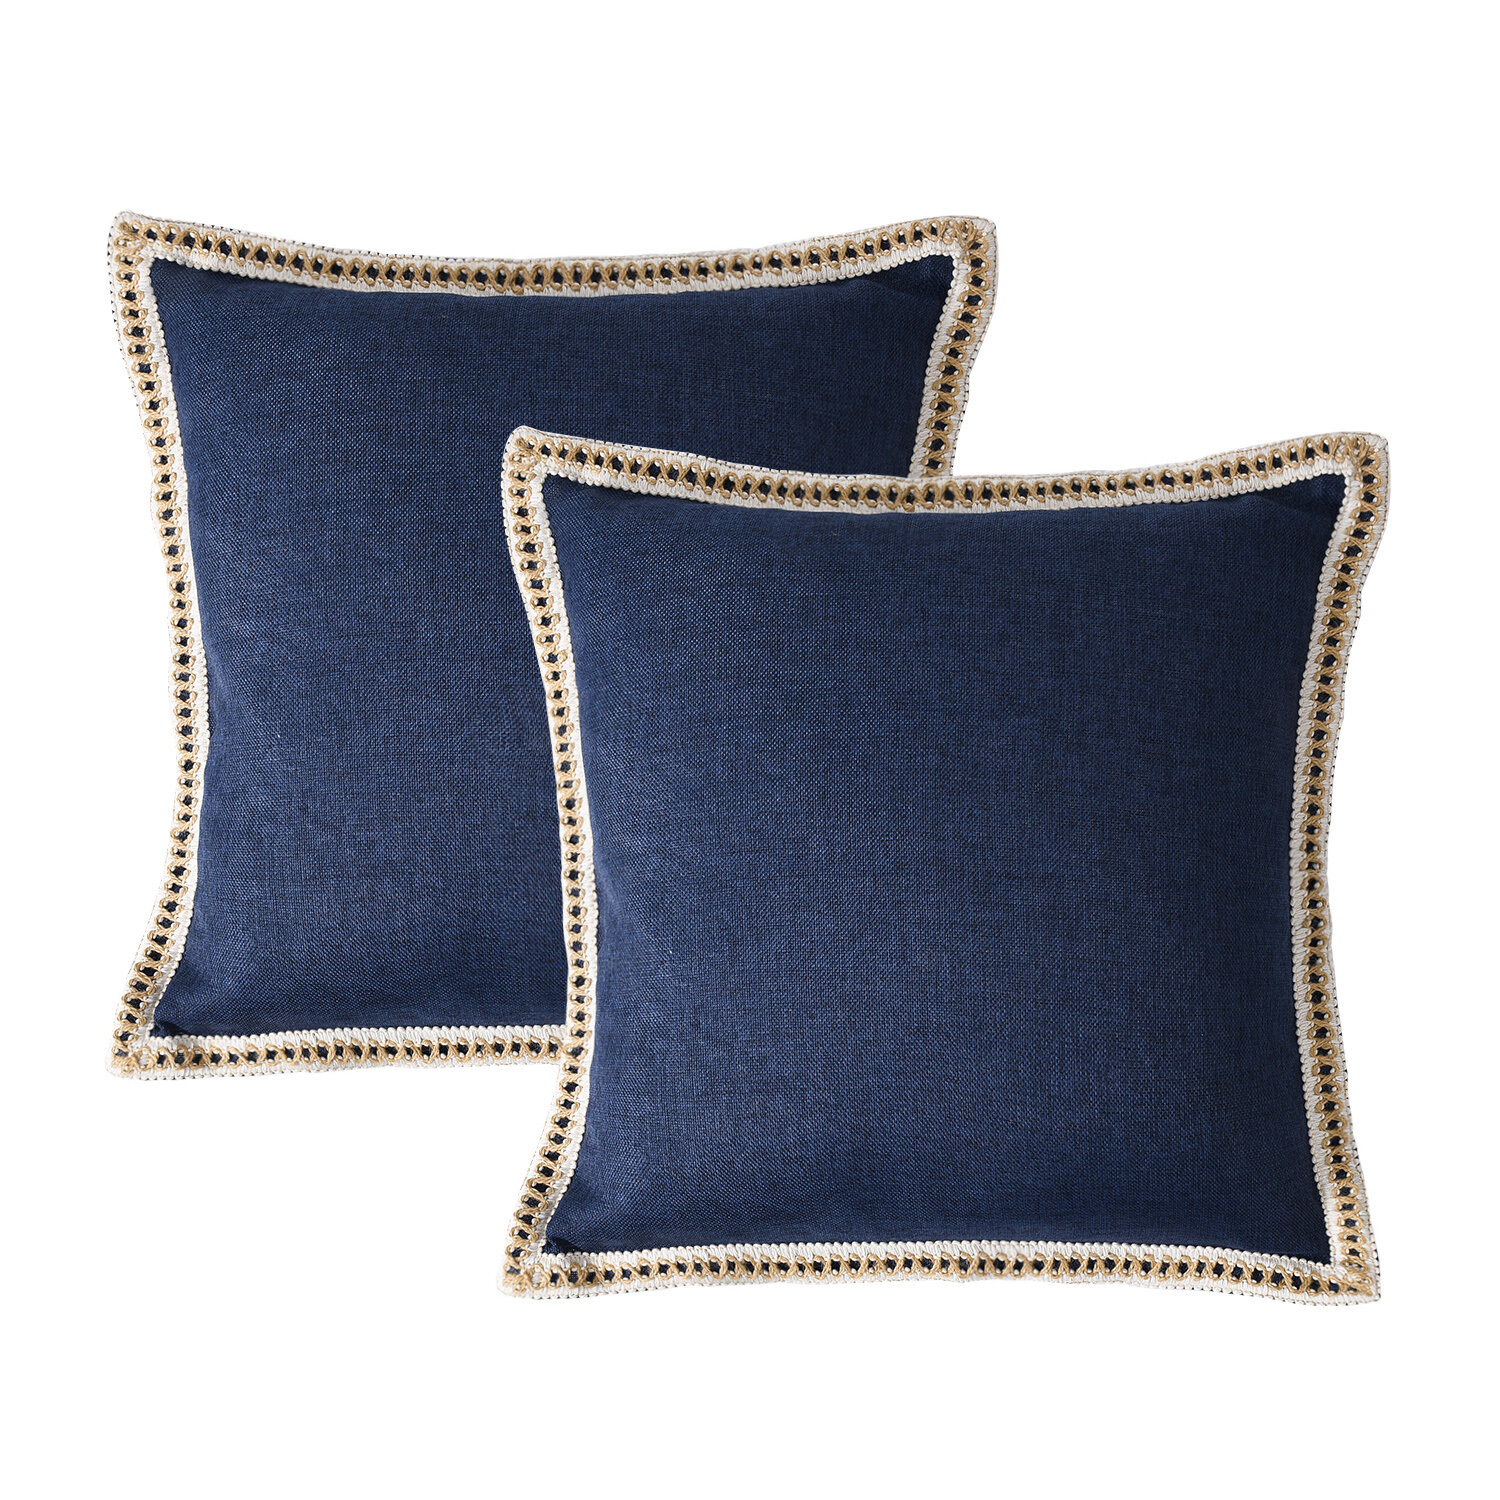 Tappahannock Square Pillow Cover (Set of 2) Dovecove Color: Navy, Size: 18 H x 18 W